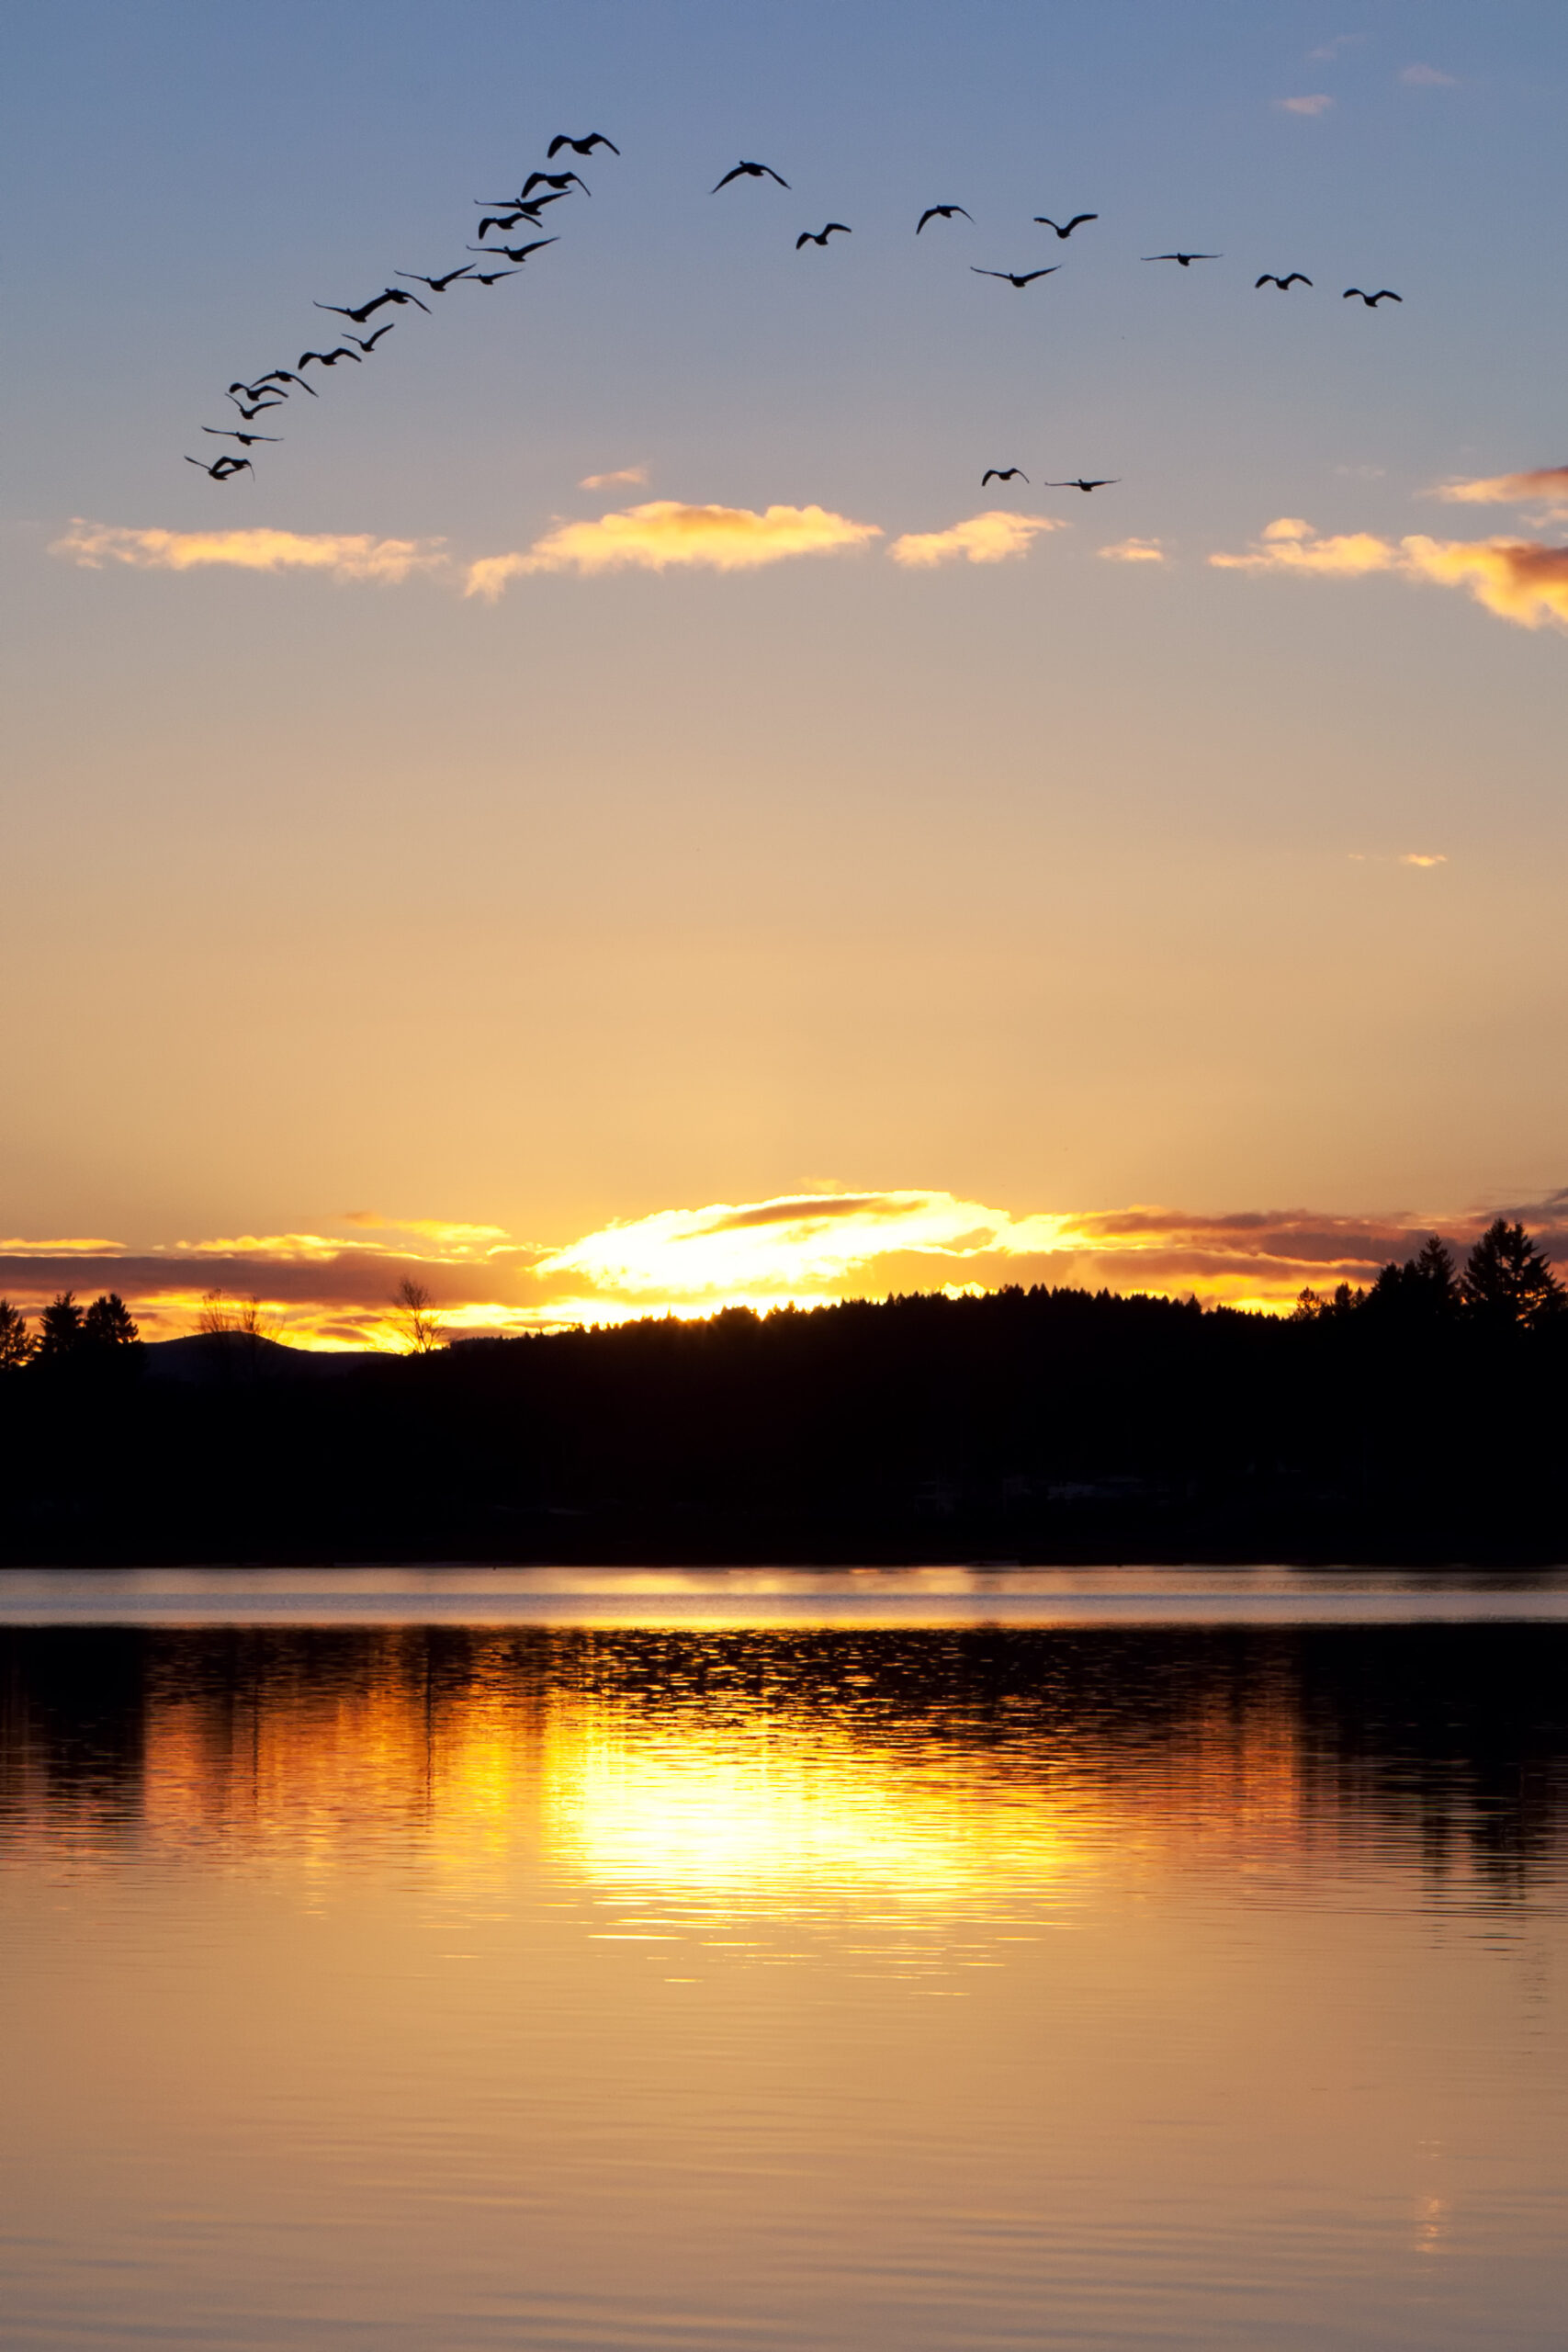 A,Wedge,Of,Geese,Flies,Over,A,Lake,During,Sunset